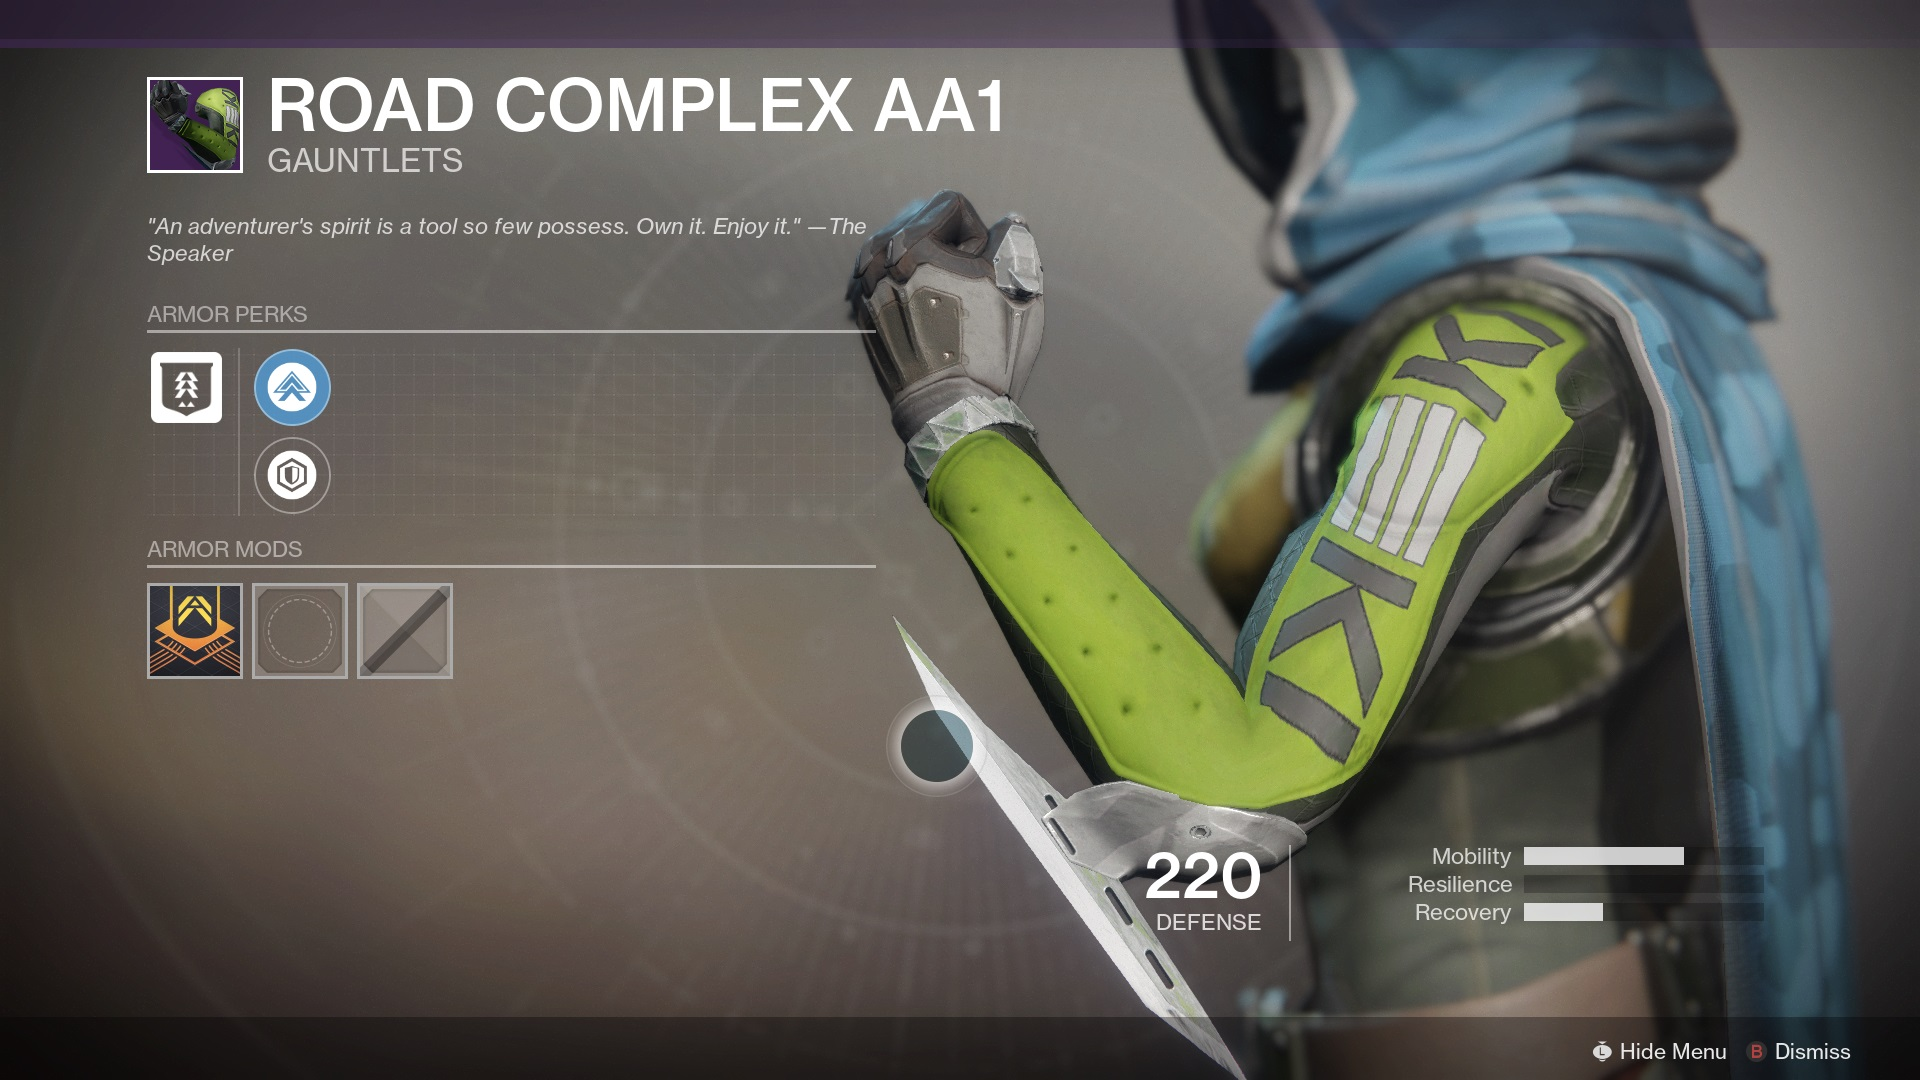 Armor Pulled From Destiny 2 Because of Hate Symbol Similarity, Bungie Says.